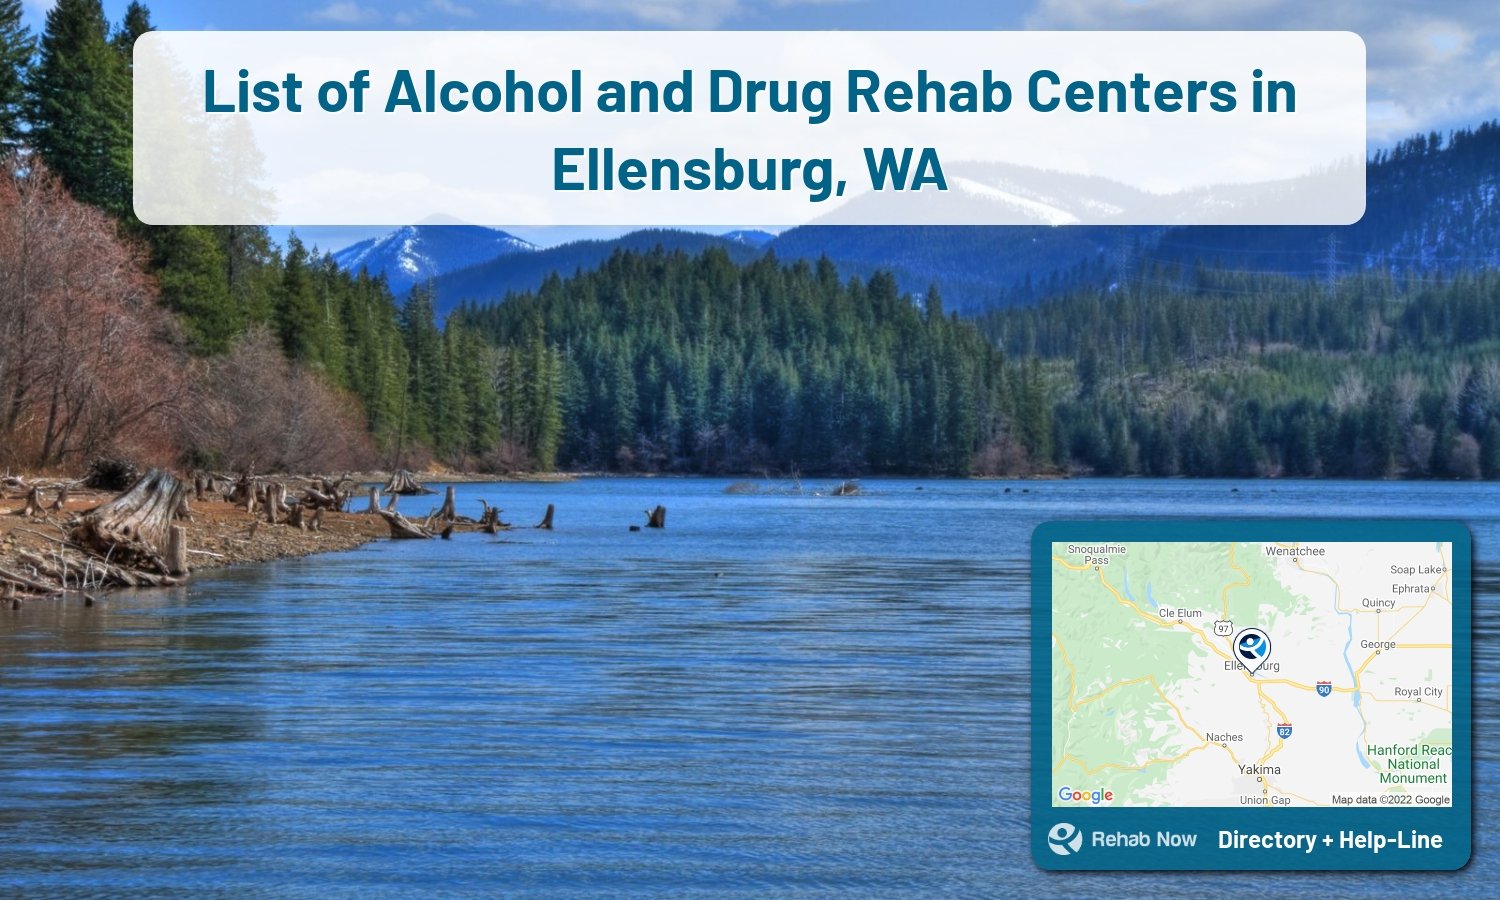 Easily find the top Rehab Centers in Ellensburg, WA. We researched hard to pick the best alcohol and drug rehab centers in Washington.